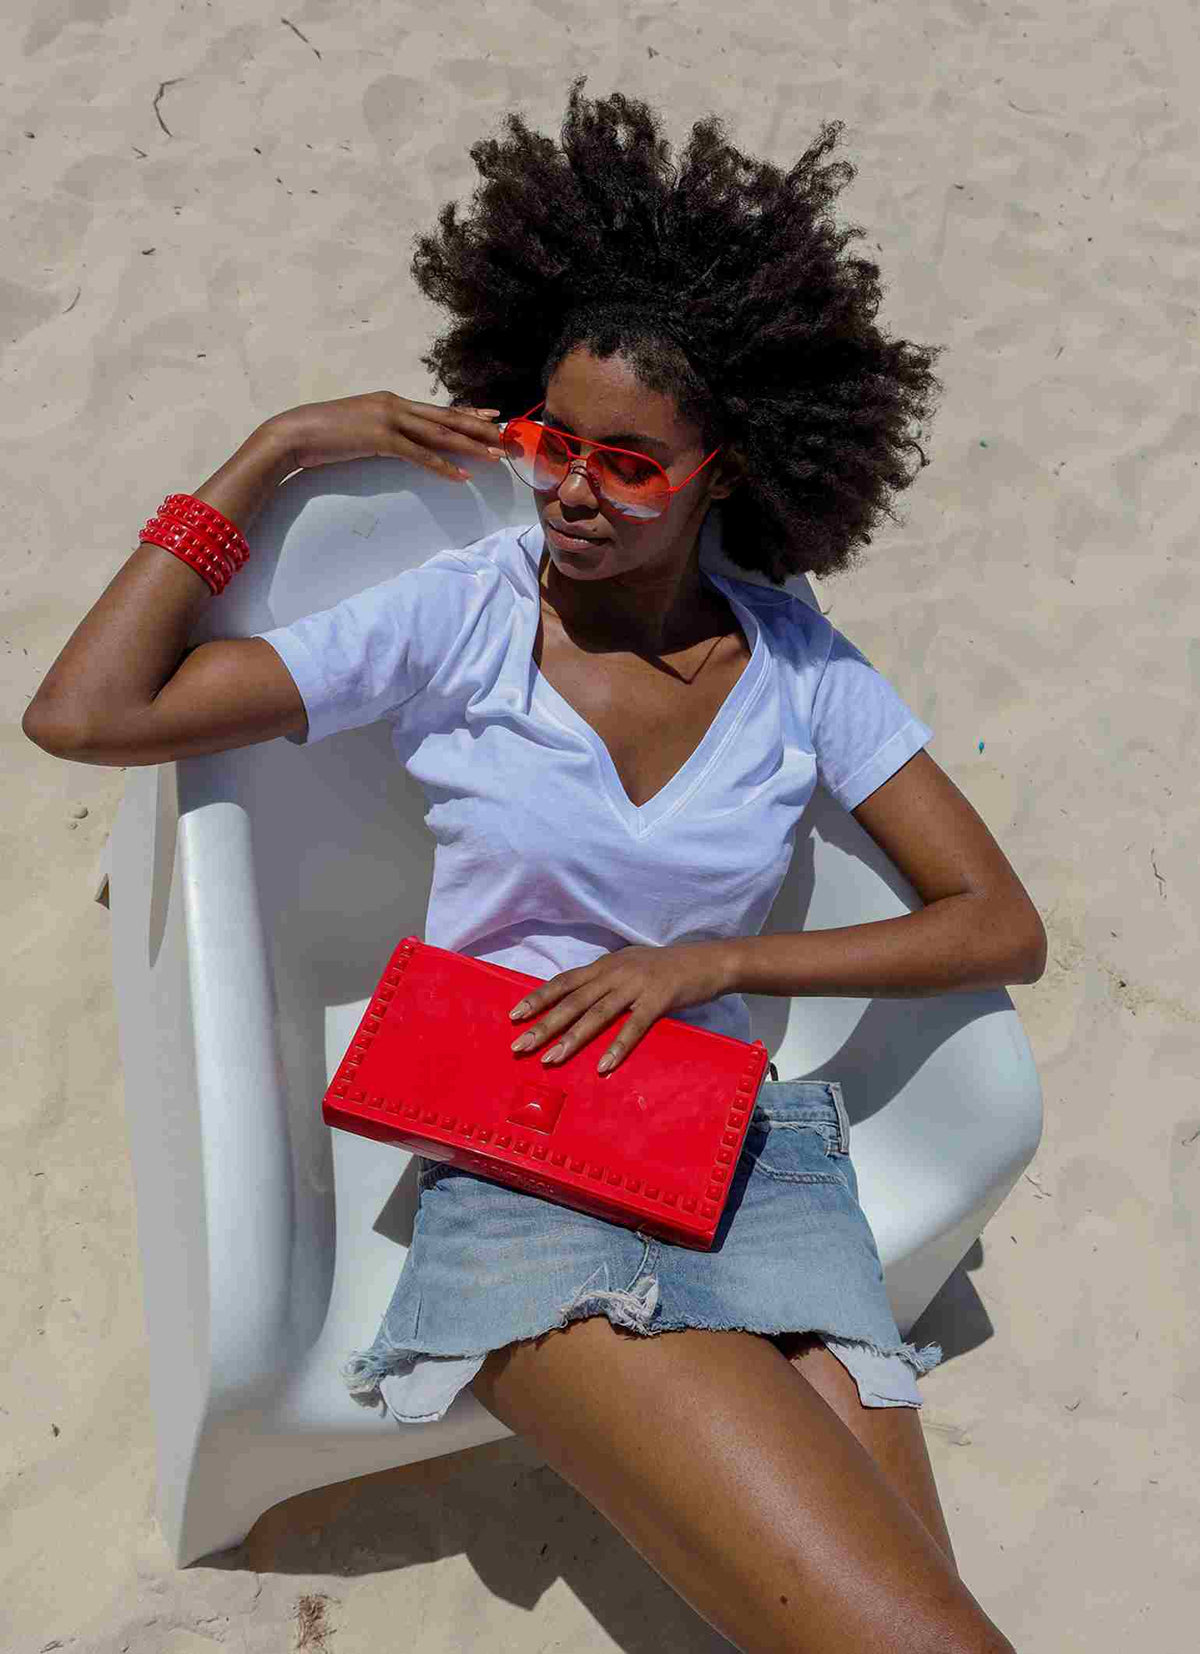 Eco-chic red jelly purse paired with Carmen Sol jelly bracelets and sunglasses